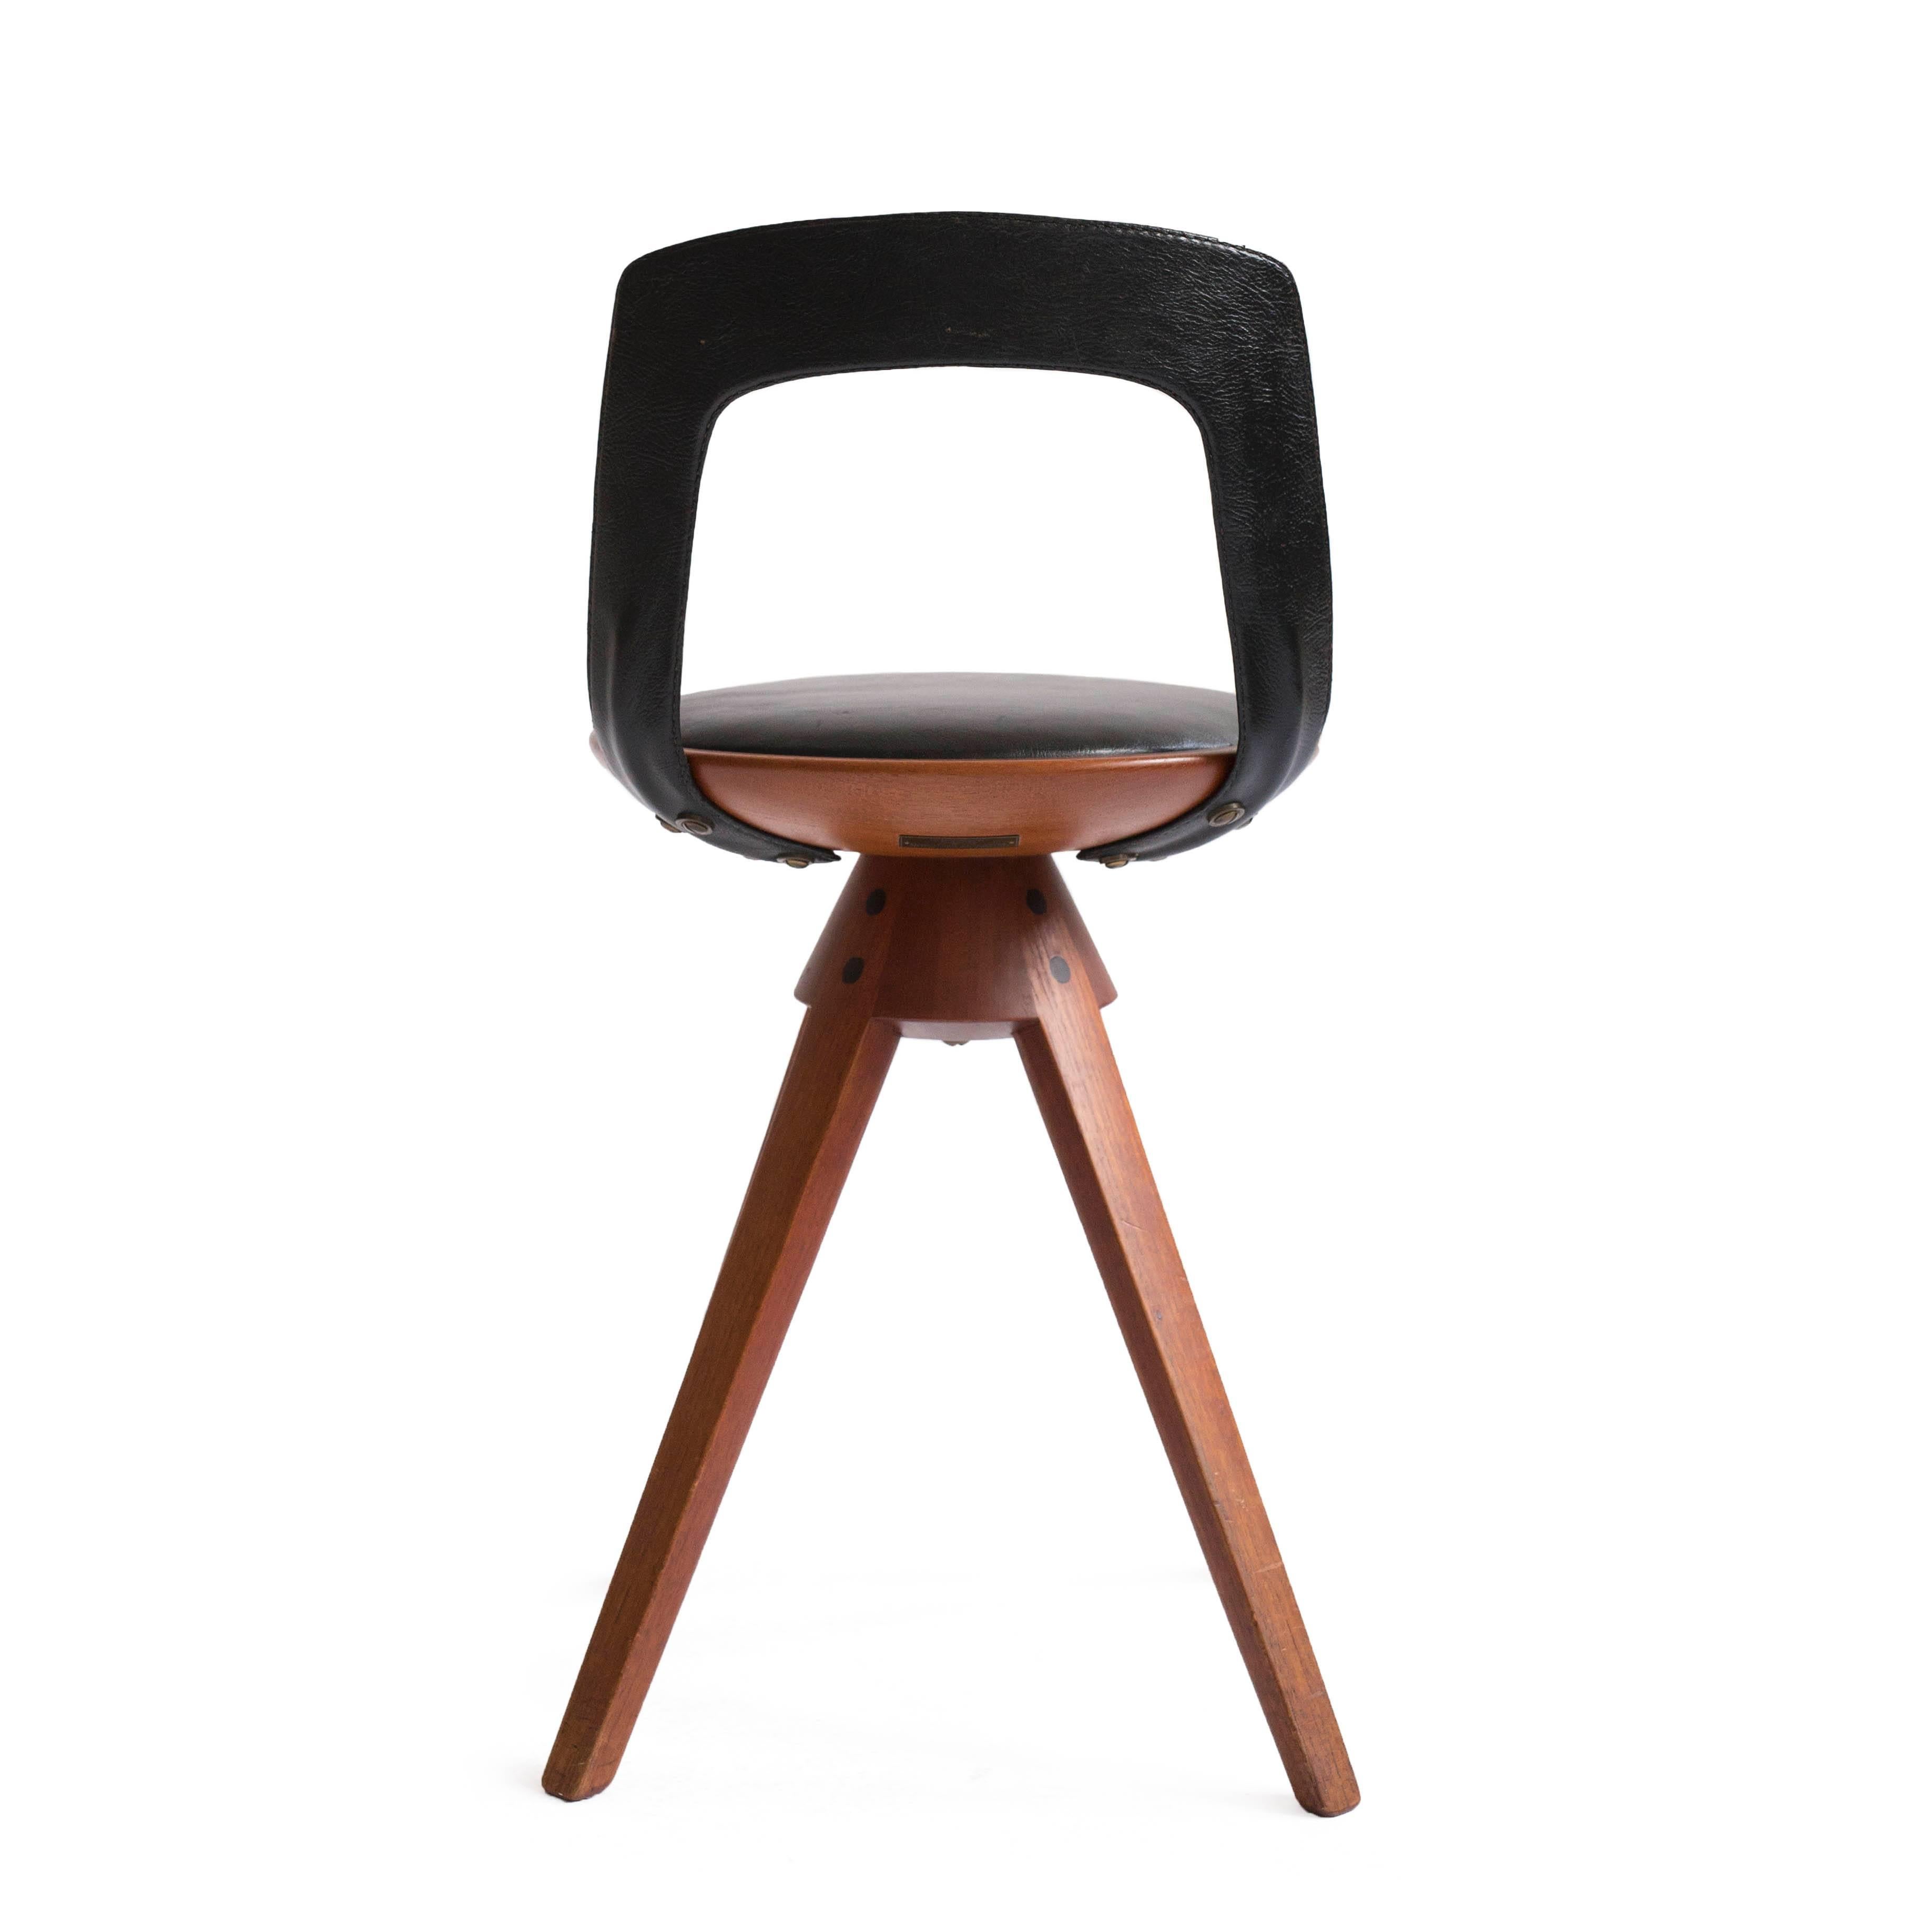 Tove & Edvard Kindt-Larsen swivel stool in teak and original black leather. 

Designed 1957, manufactured and marked by cabinetmaker Thorald Madsen, Copenhagen. Marked with metal plaque. 

Very fine condition.